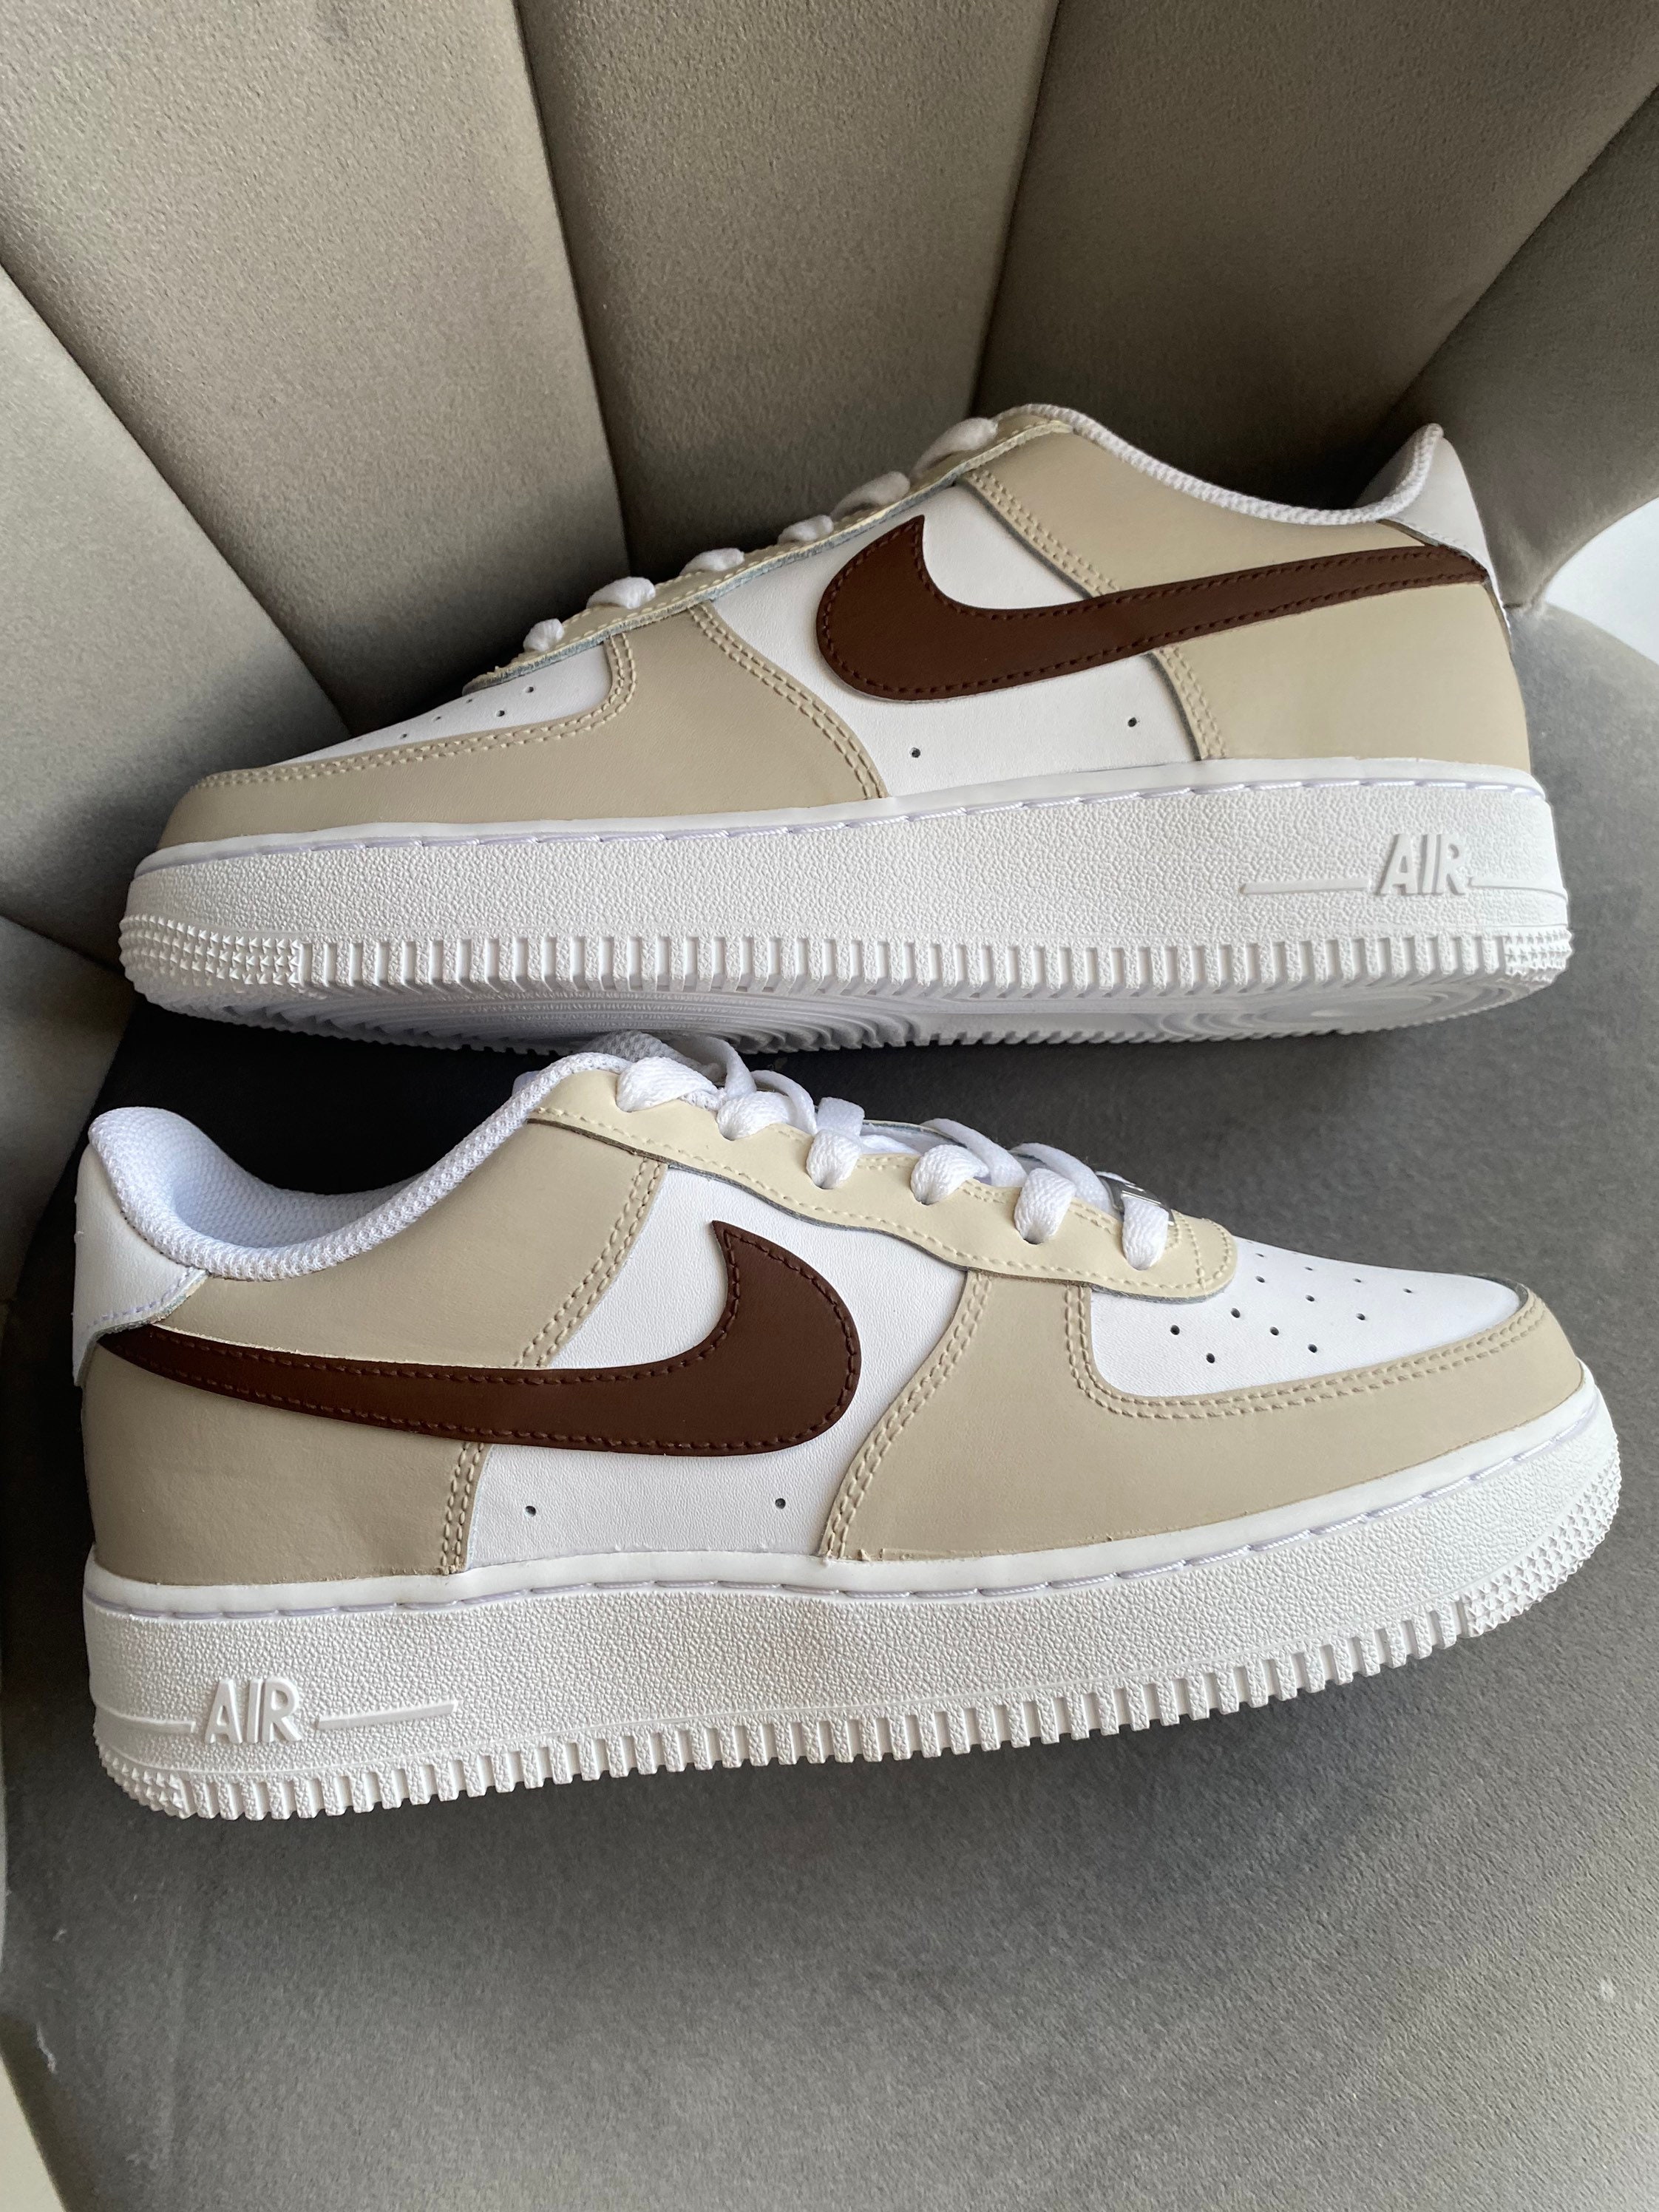 overschrijving humor Picknicken Beige and Brown Custom Air Force 1 - Etsy Hong Kong